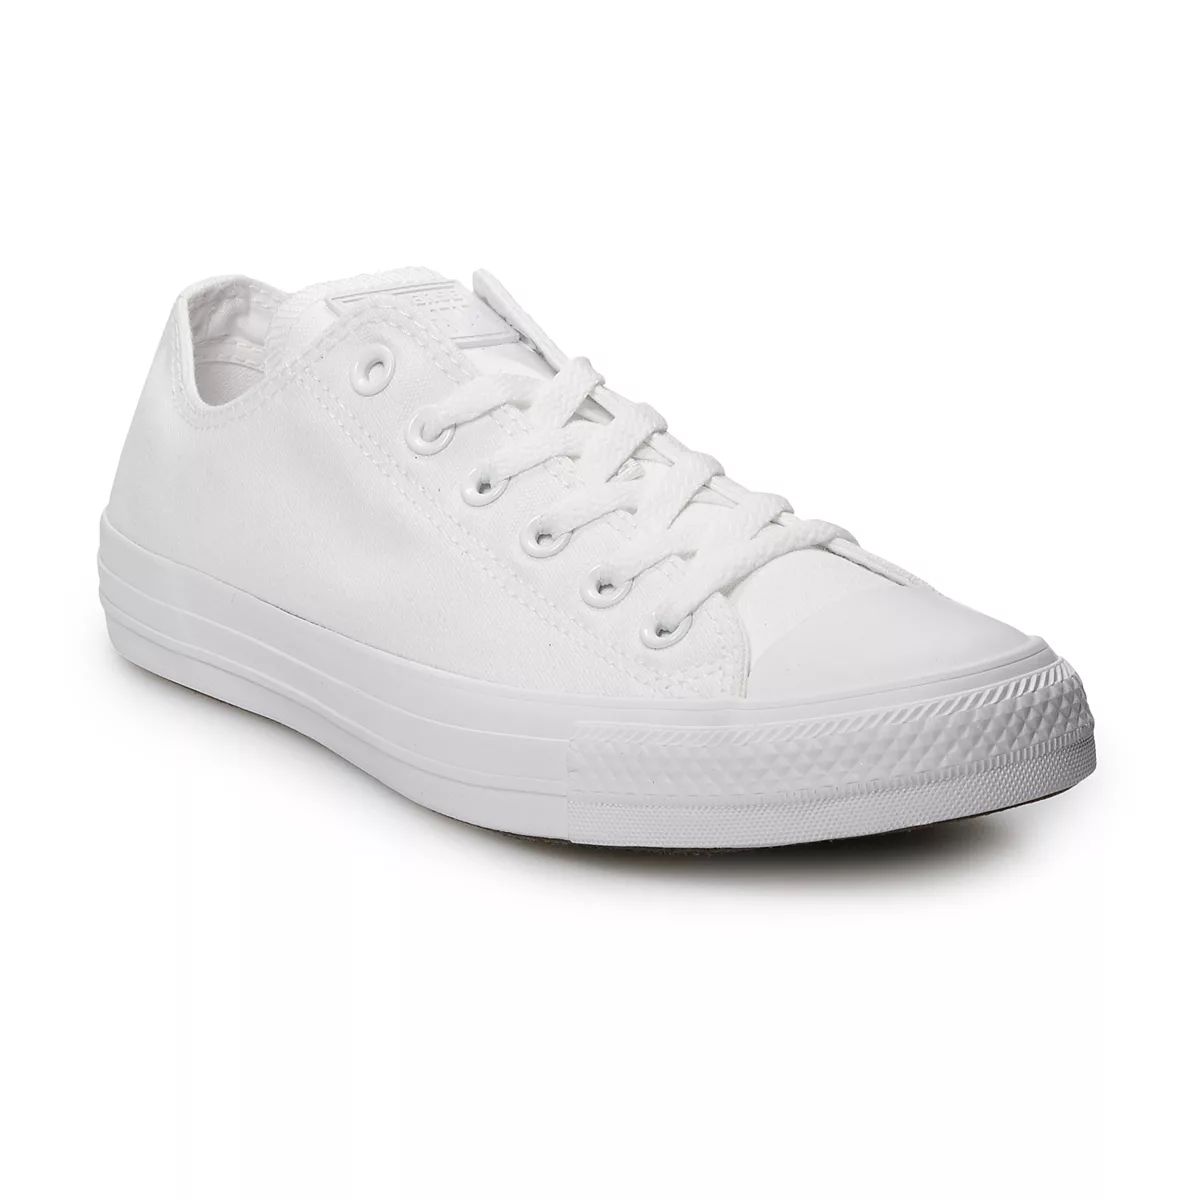 Adult Converse All Star Chuck Taylor Sneakers
                   ... Color:
					White Mono
				
... | Kohl's